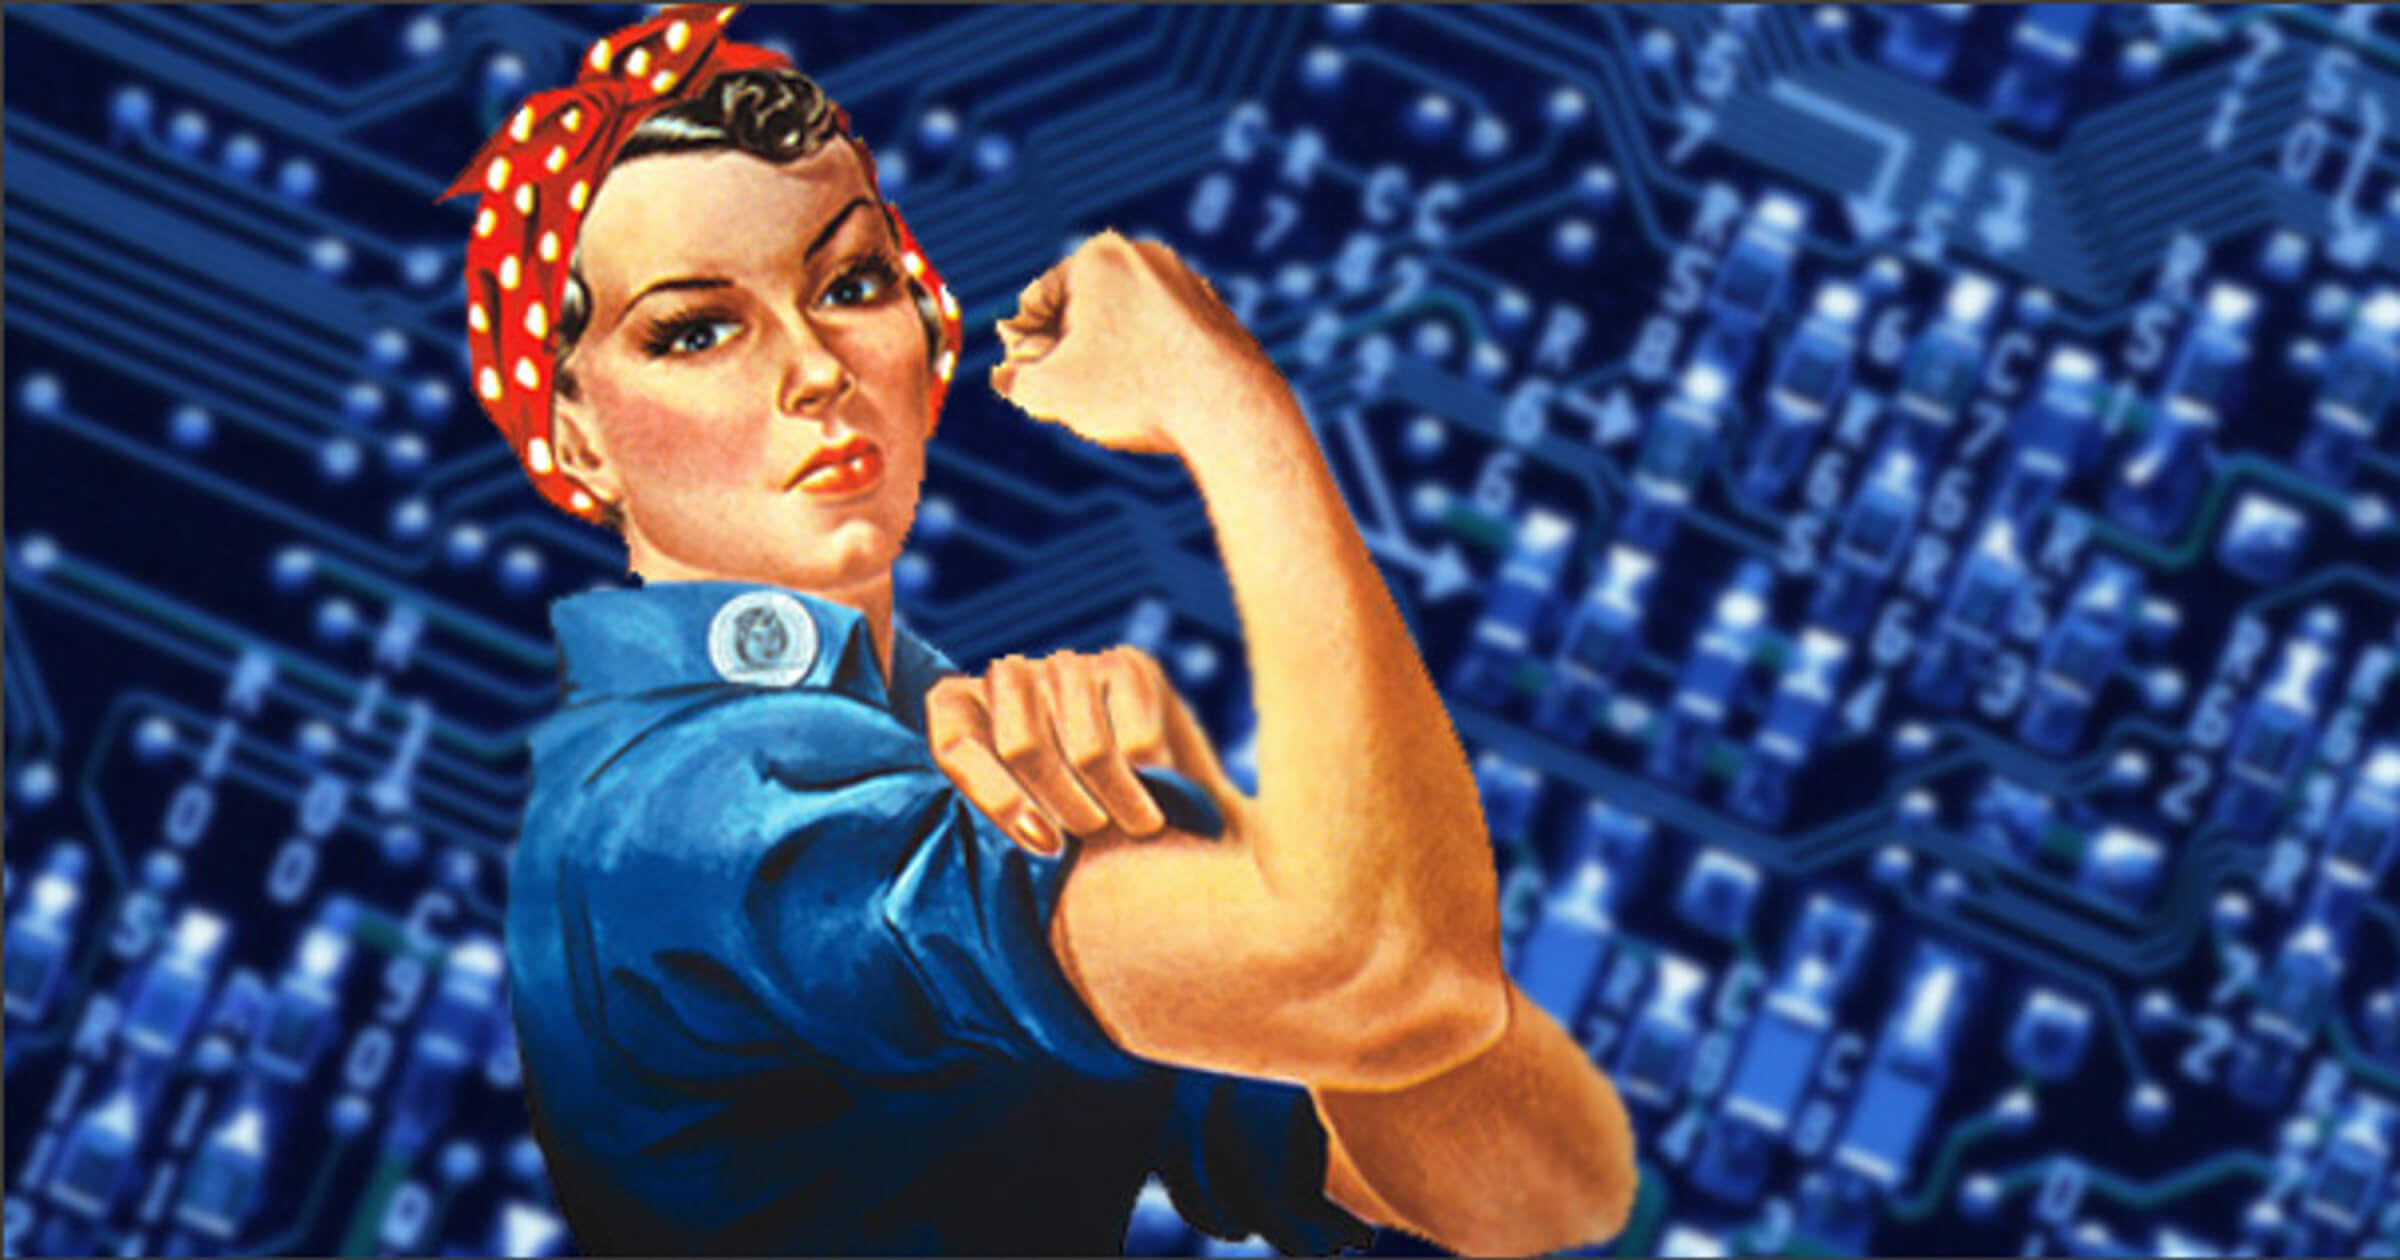 Women In Tech Trenches